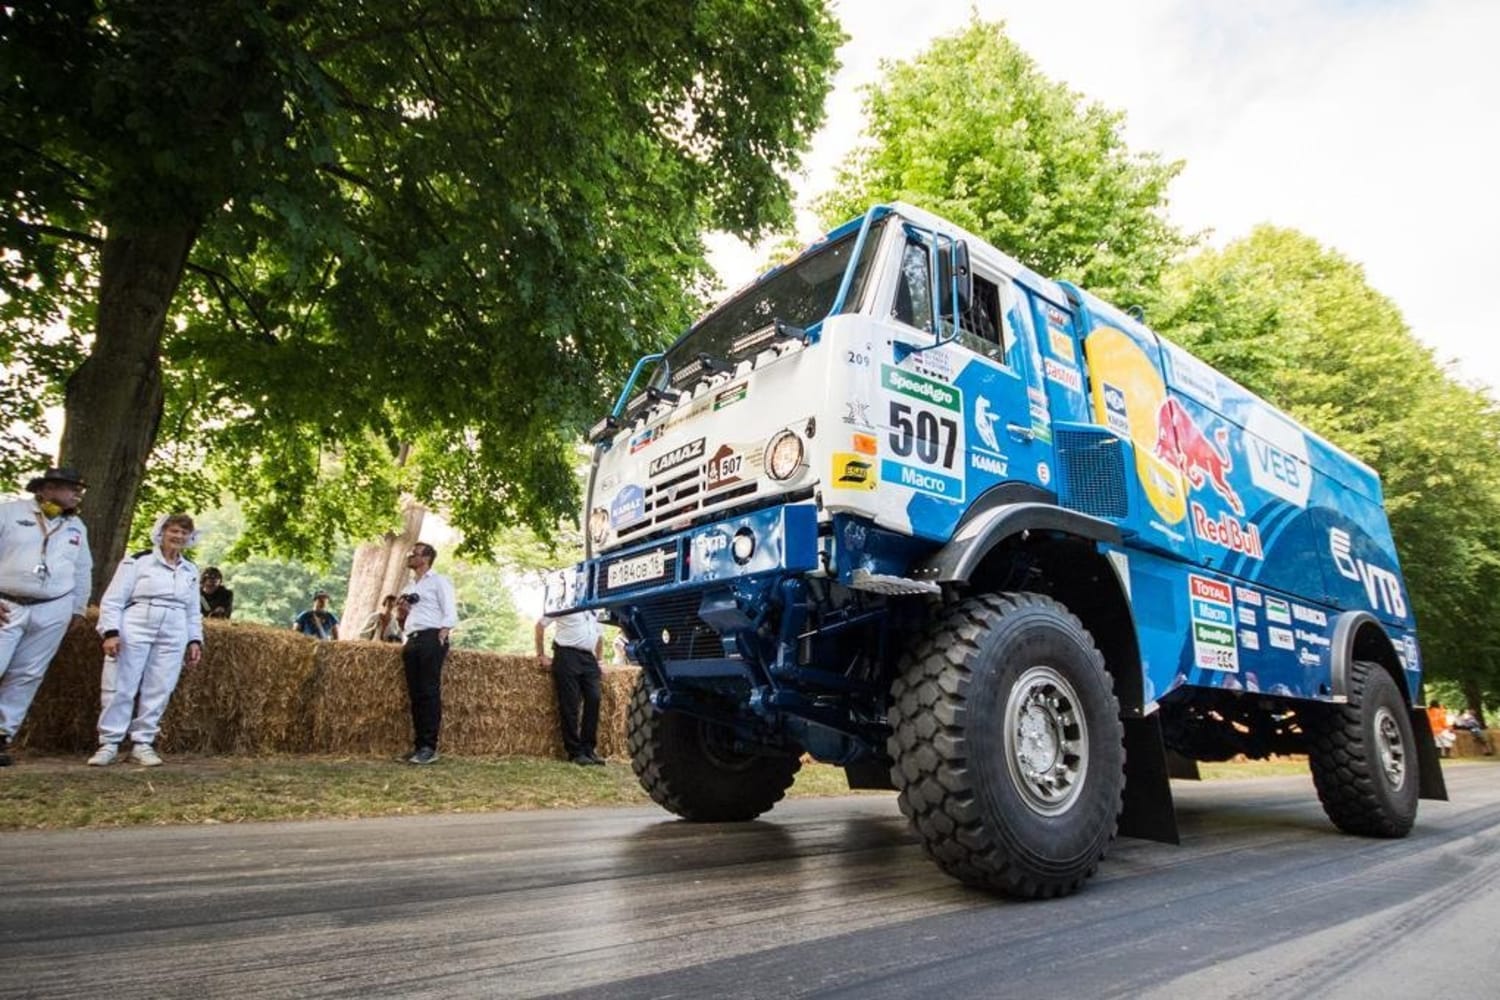 The KAMAZ-4326 at the 2015 Goodwood Festival of Speed